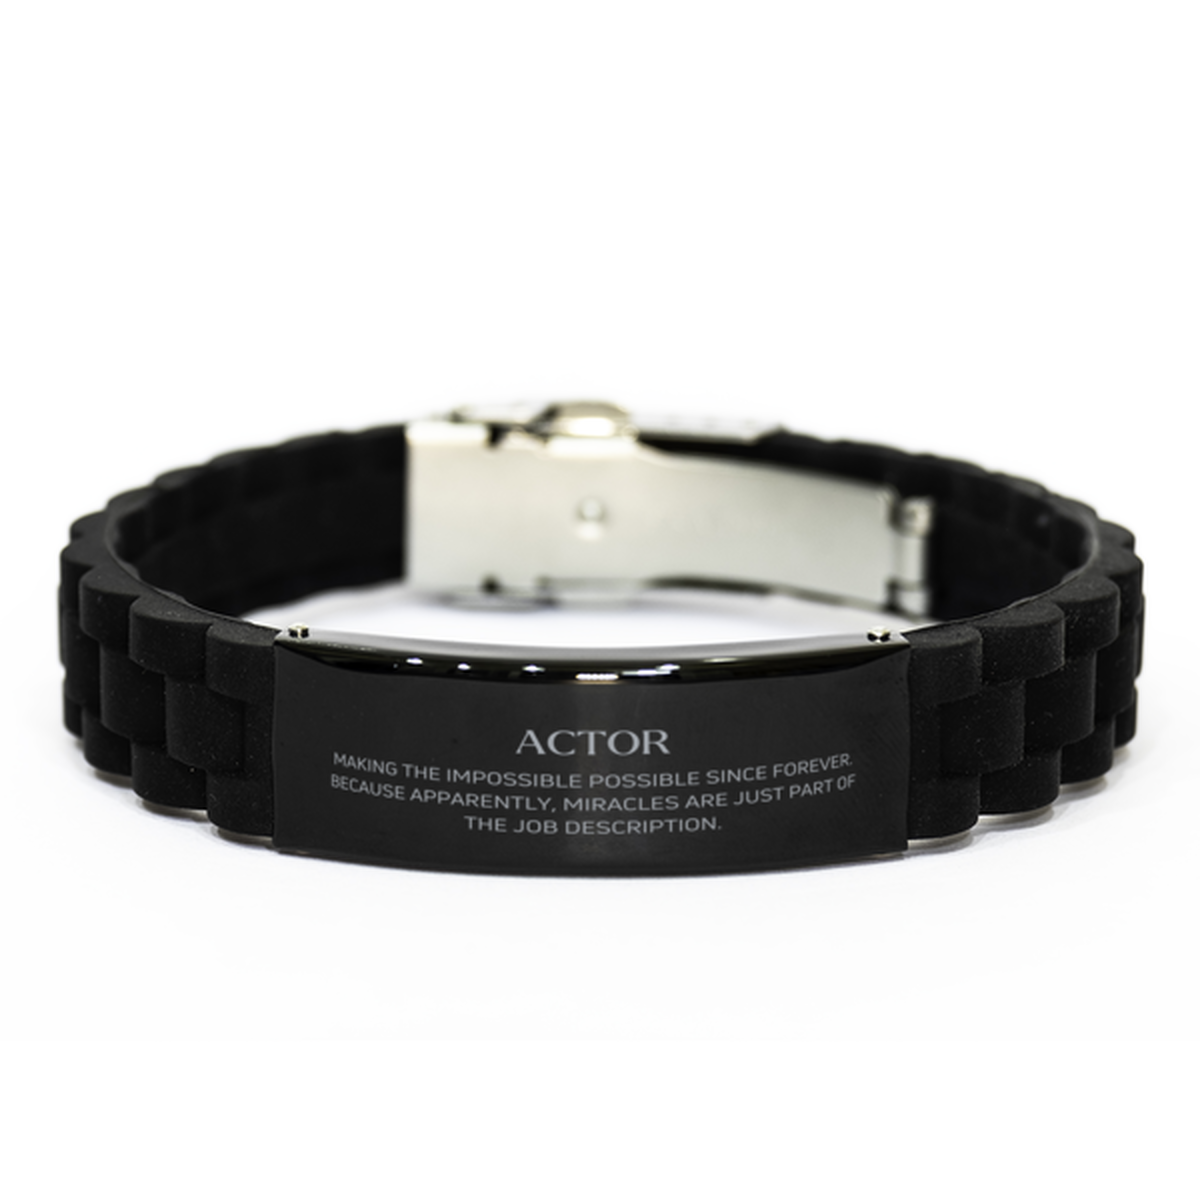 Funny Actor Gifts, Miracles are just part of the job description, Inspirational Birthday Black Glidelock Clasp Bracelet For Actor, Men, Women, Coworkers, Friends, Boss